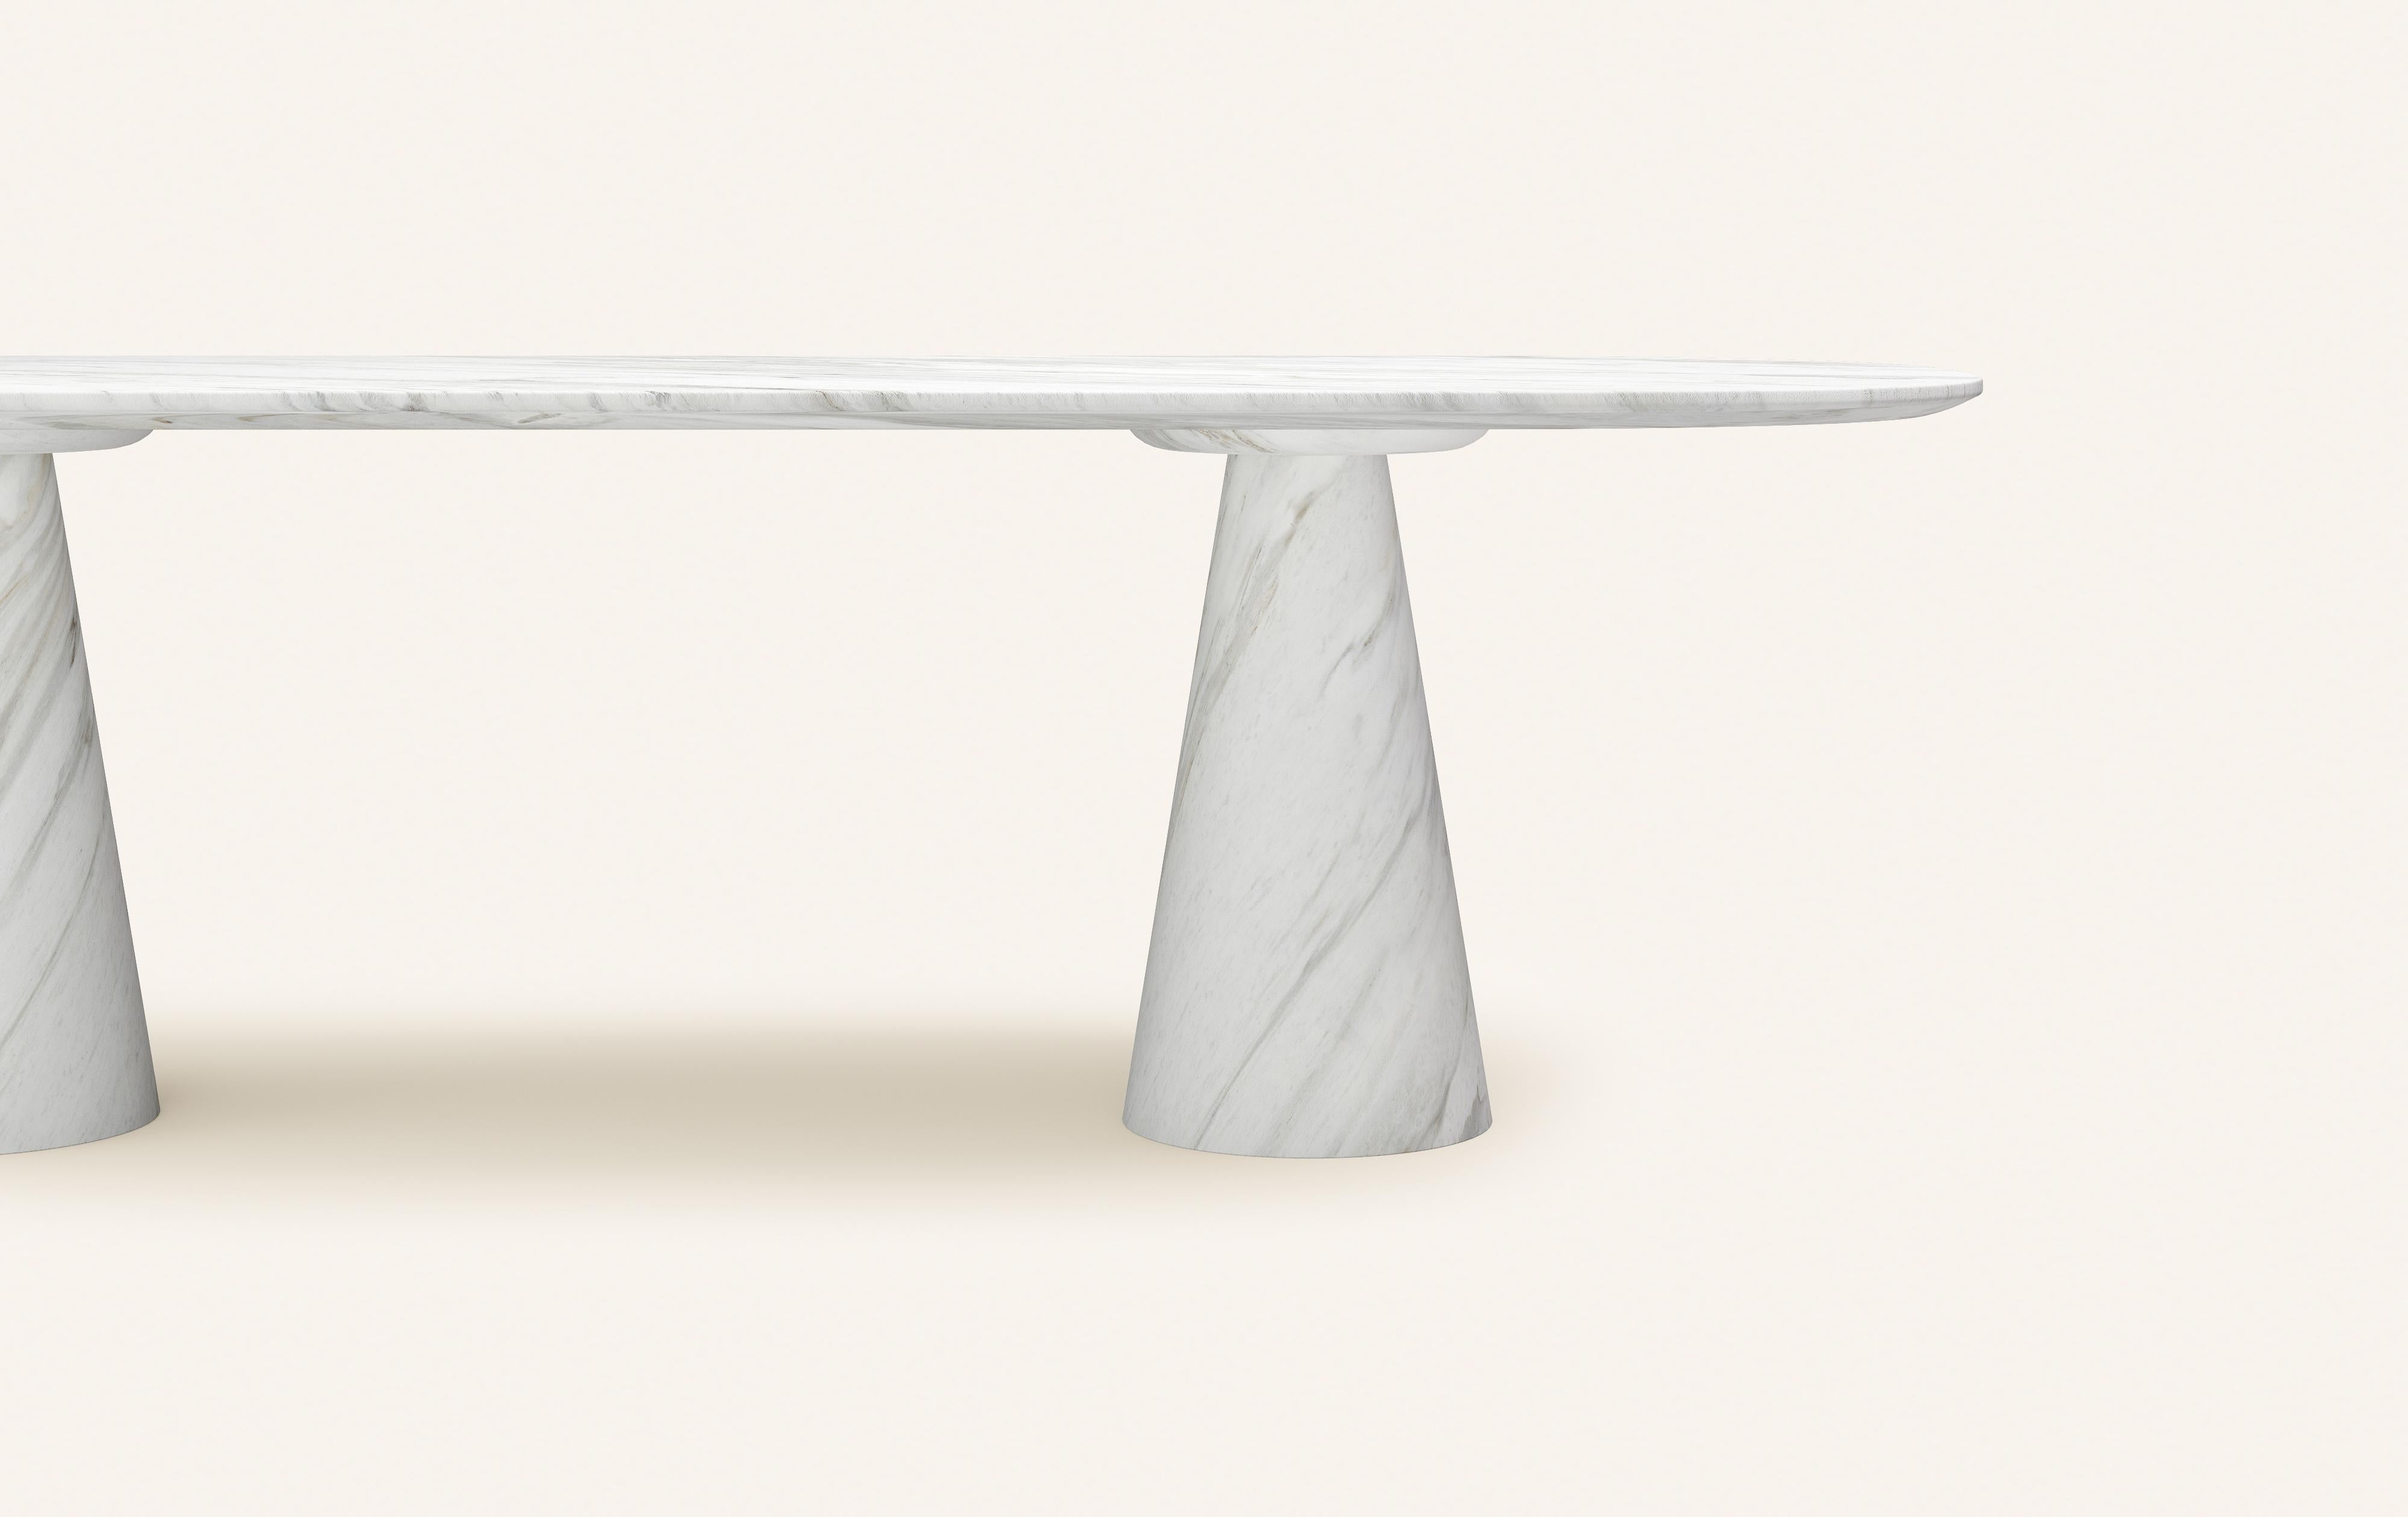 American FORM(LA) Cono Oval Dining Table 118”L x 48”W x 30”H Volakas White Marble For Sale